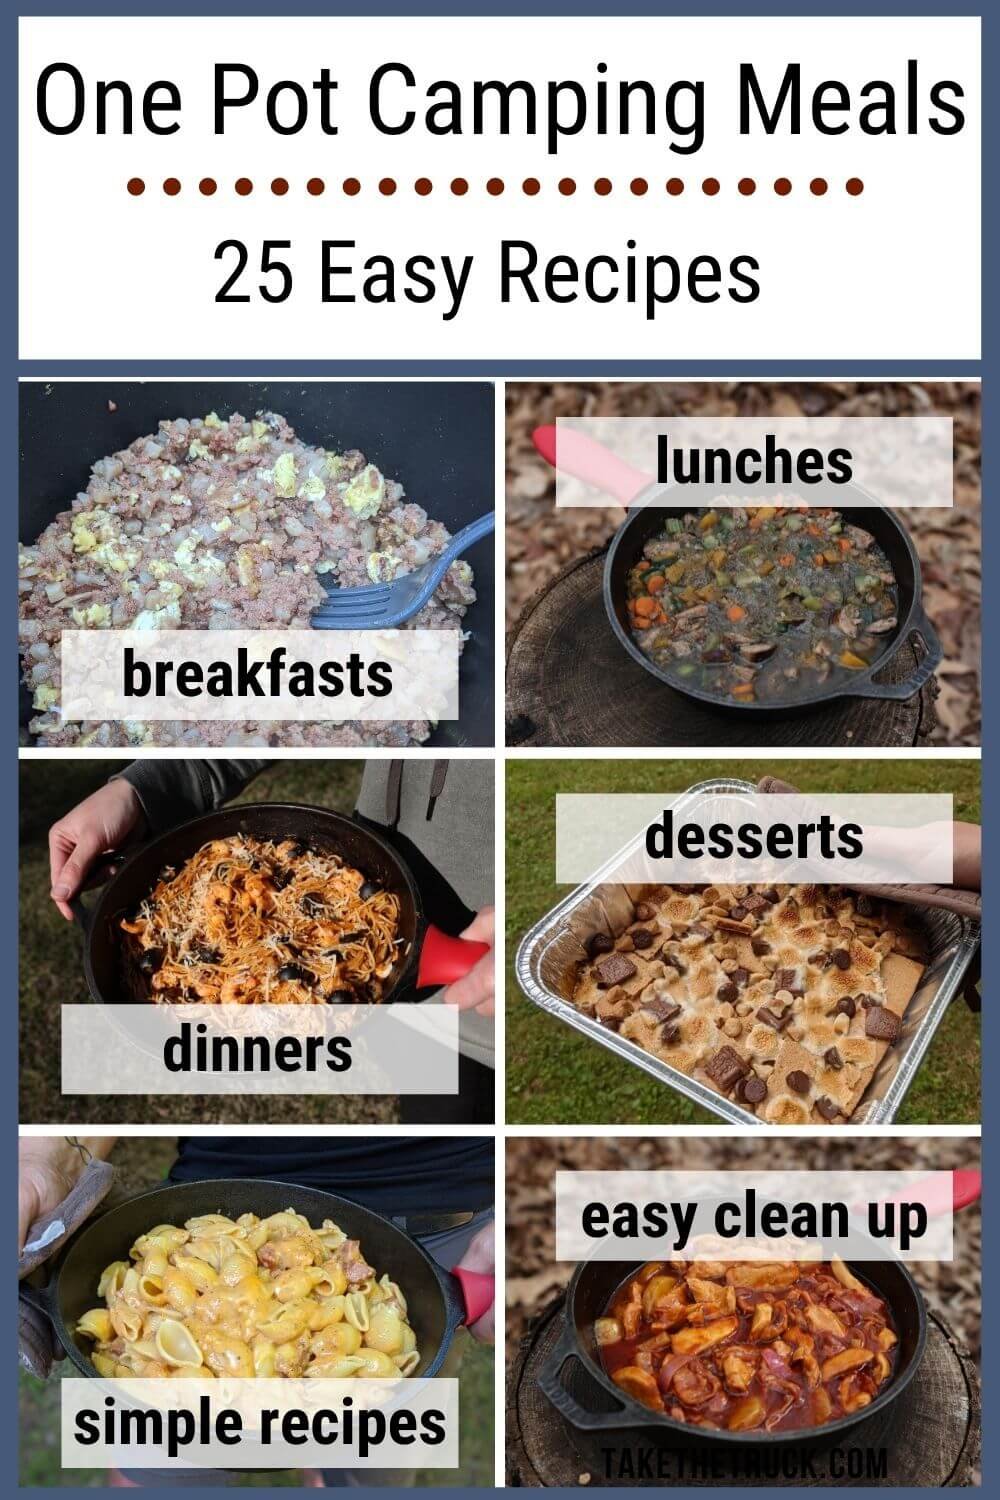 25 easy one pot camping meals for families. Extra one pot camping meal dinner ideas. Camping one pot meals free printable showing all the one pot camping recipes.